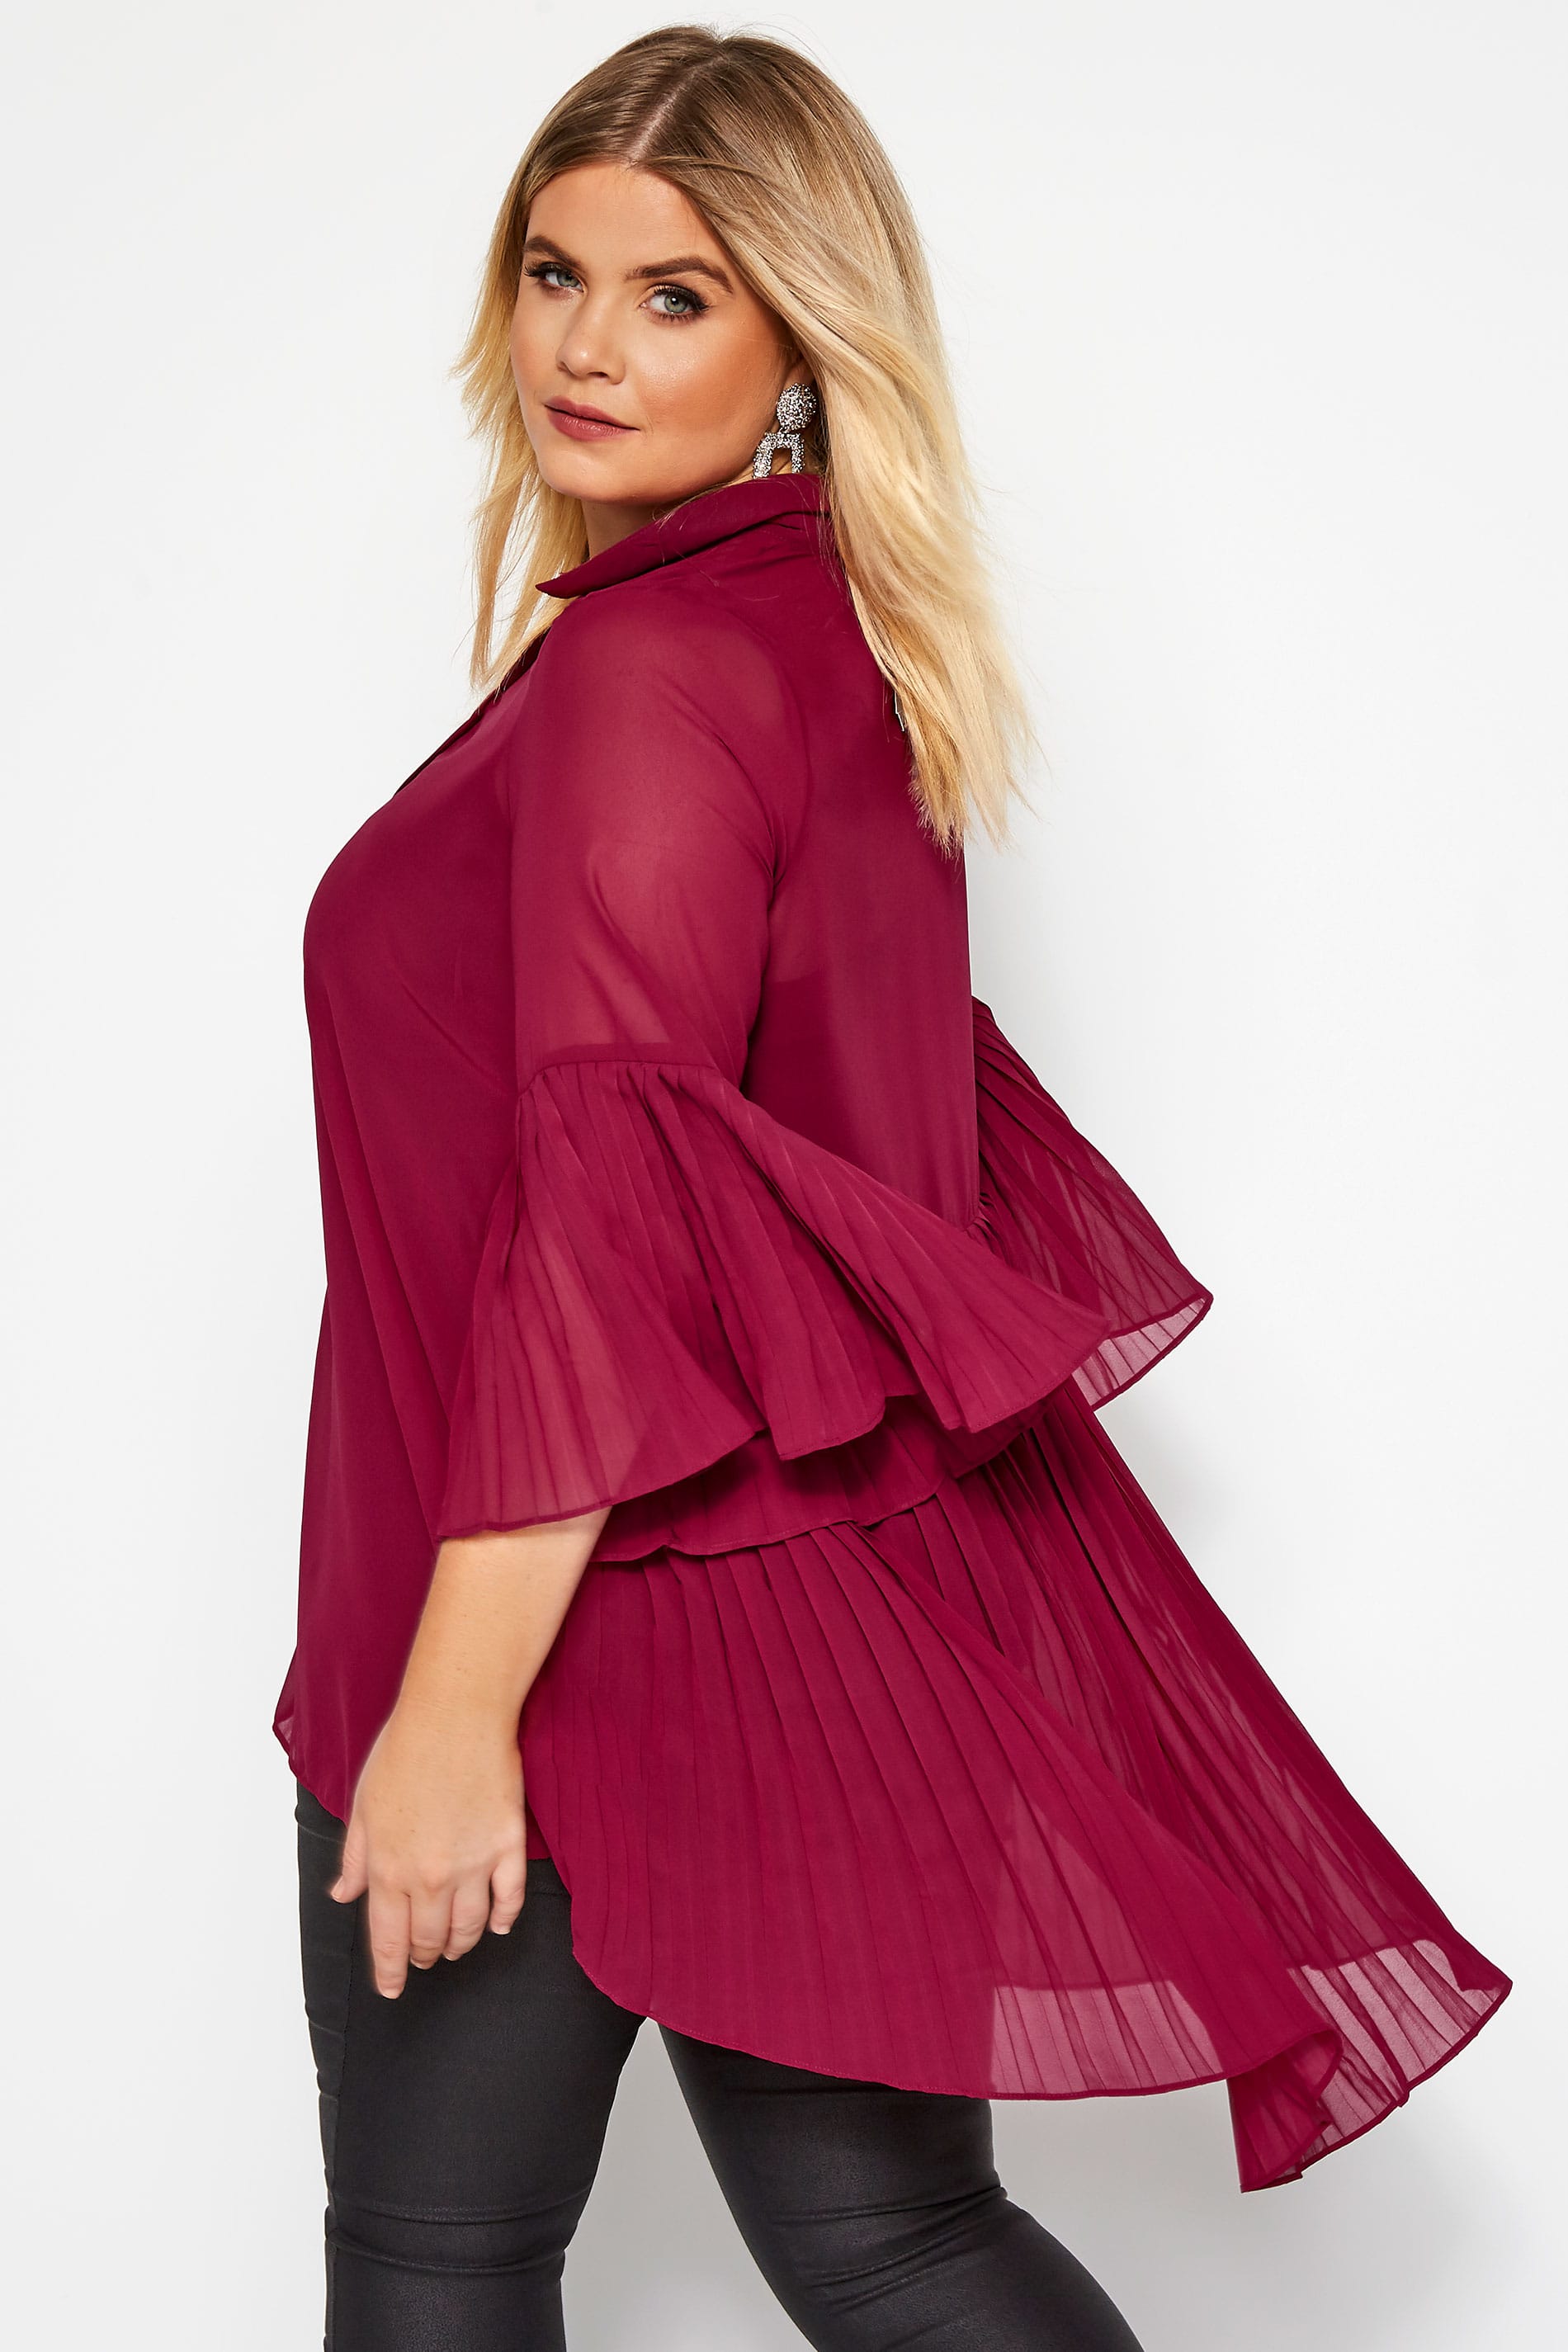 YOURS LONDON Burgundy Pleated Chiffon Shirt | Yours Clothing 1